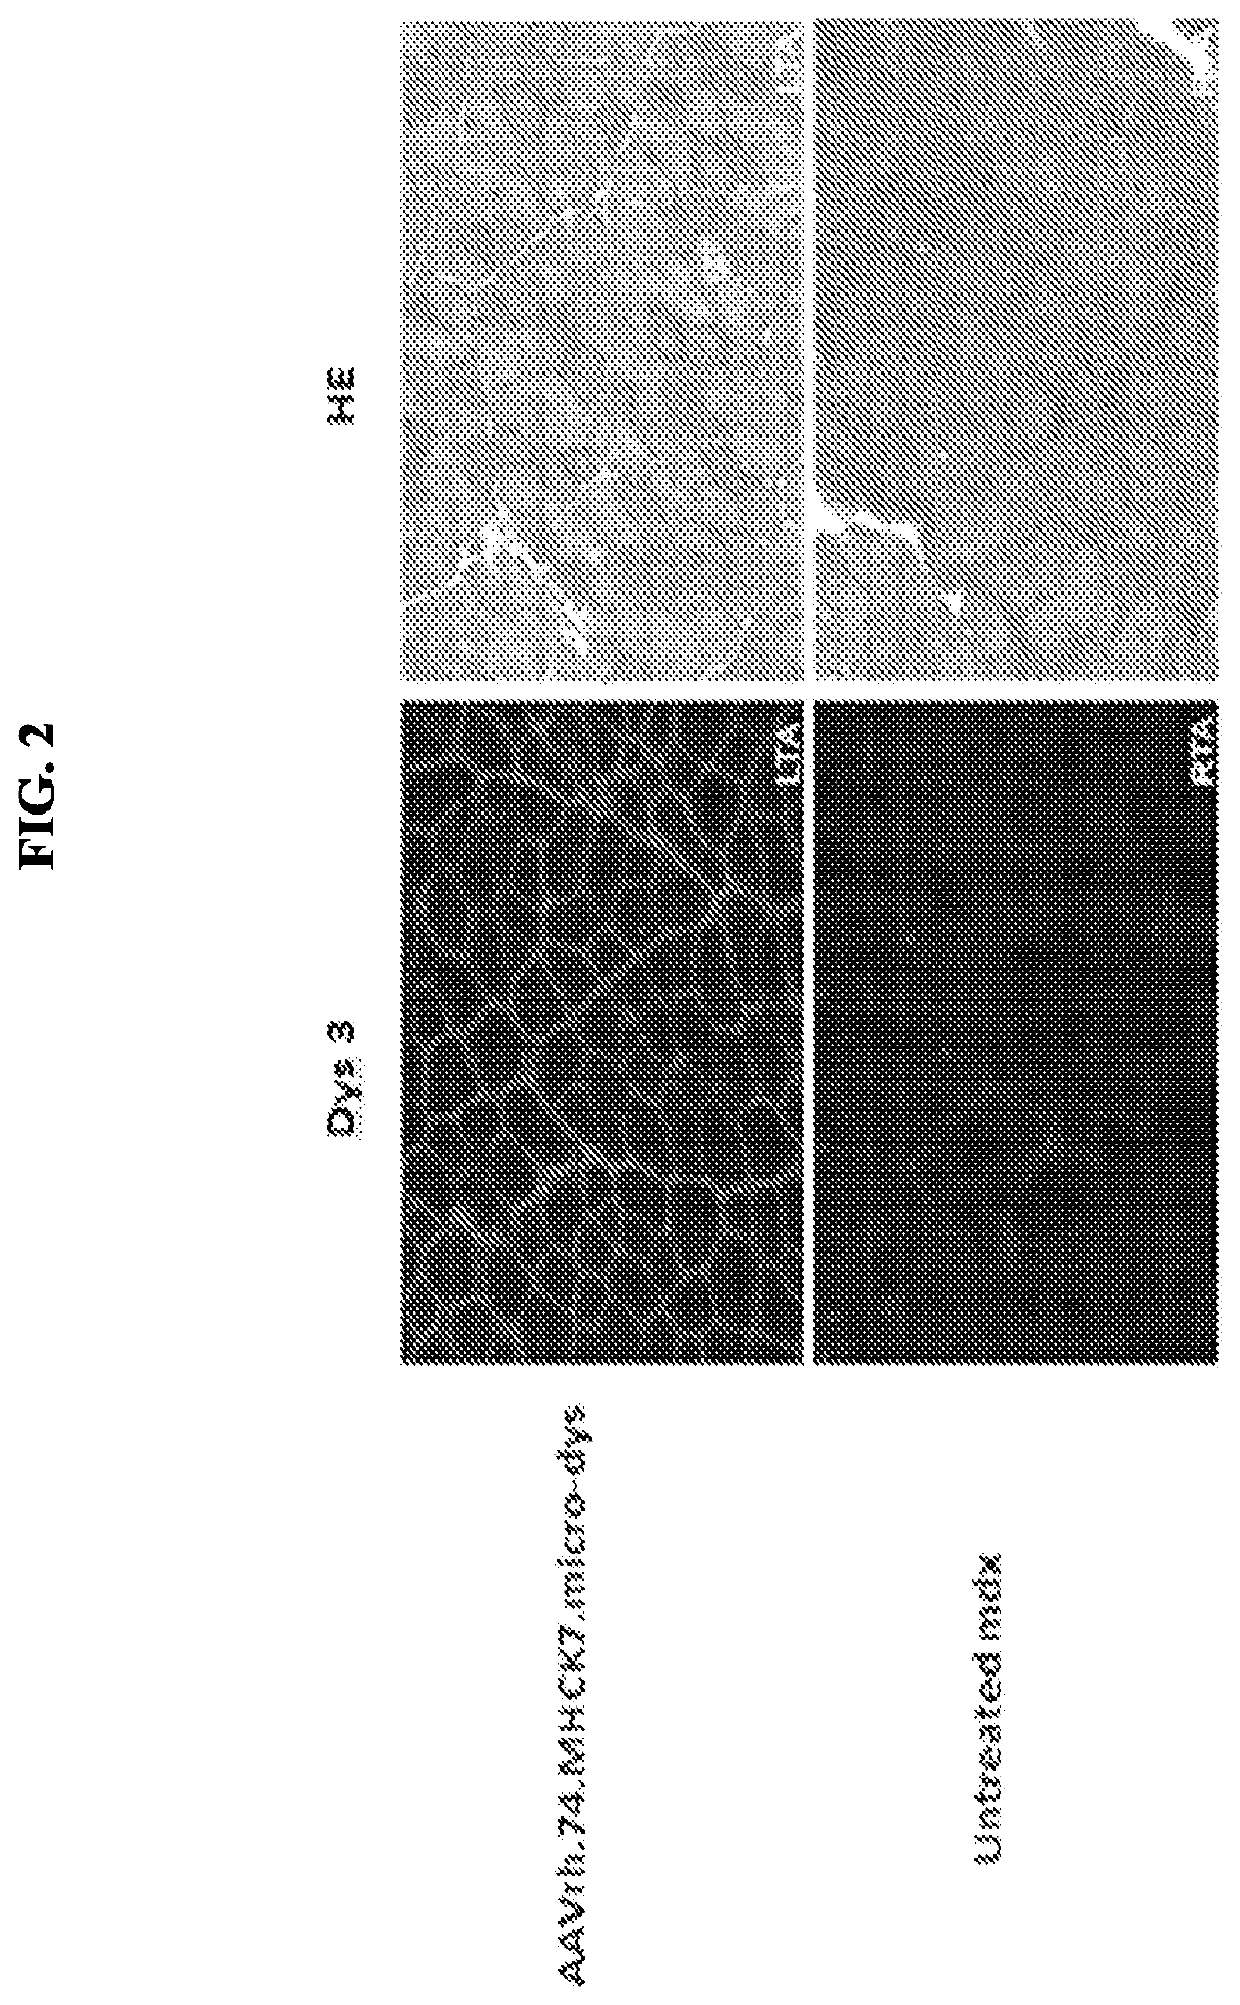 Adeno-associated virus vector delivery of muscle specific micro-dystrophin to treat muscular dystrophy